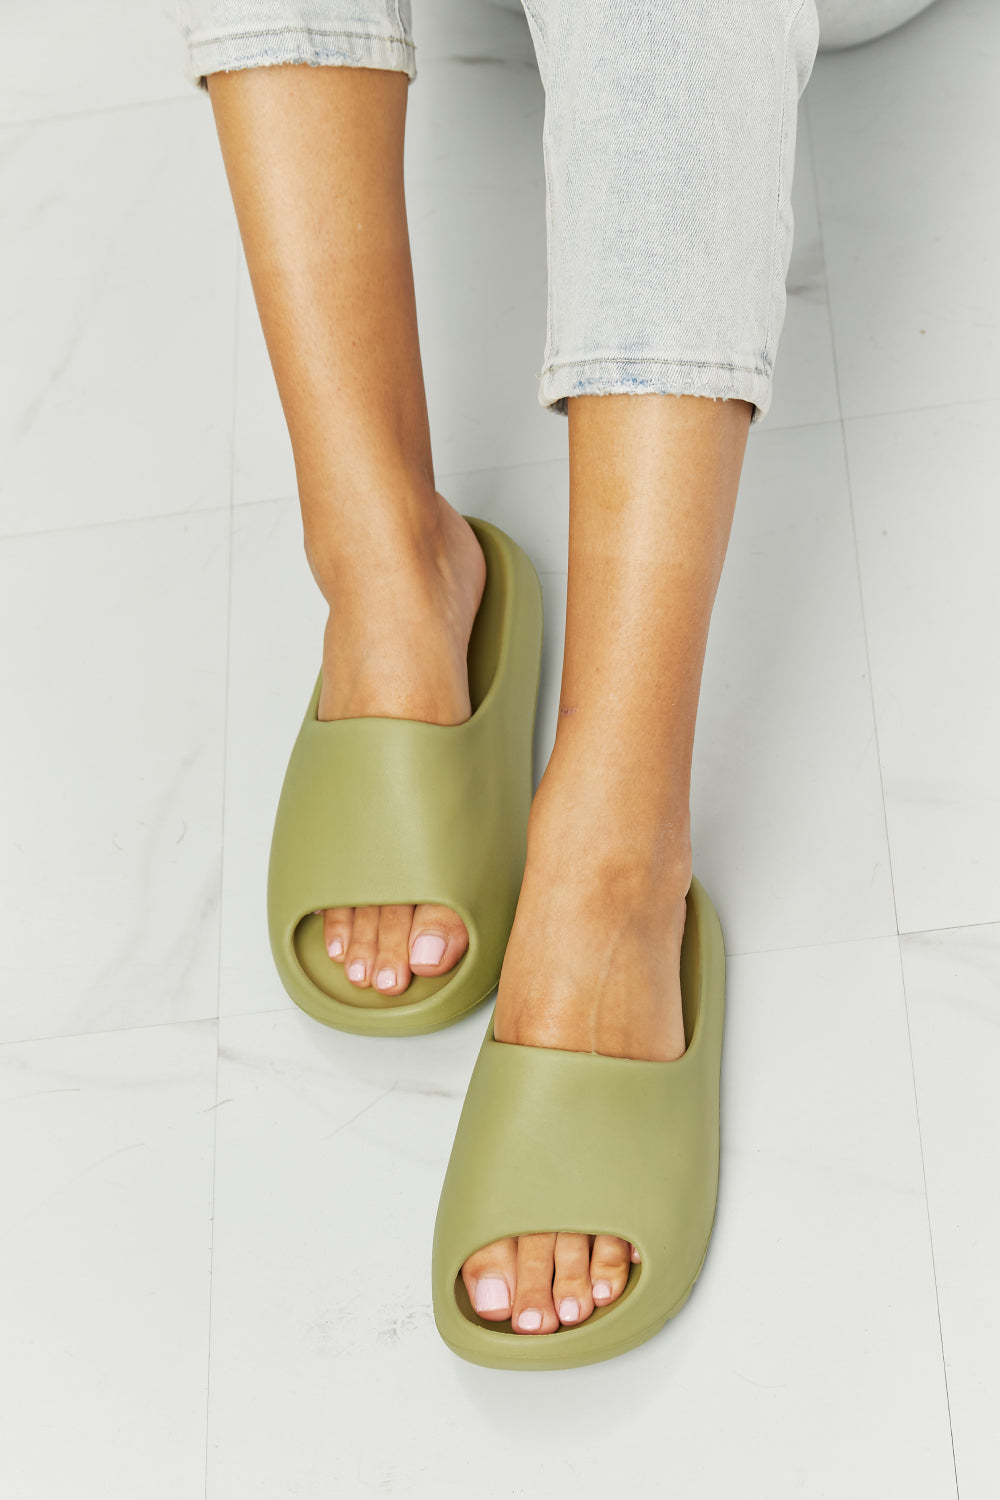 NOOK JOI In My Comfort Zone Slides in Green - The Fashion Unicorn